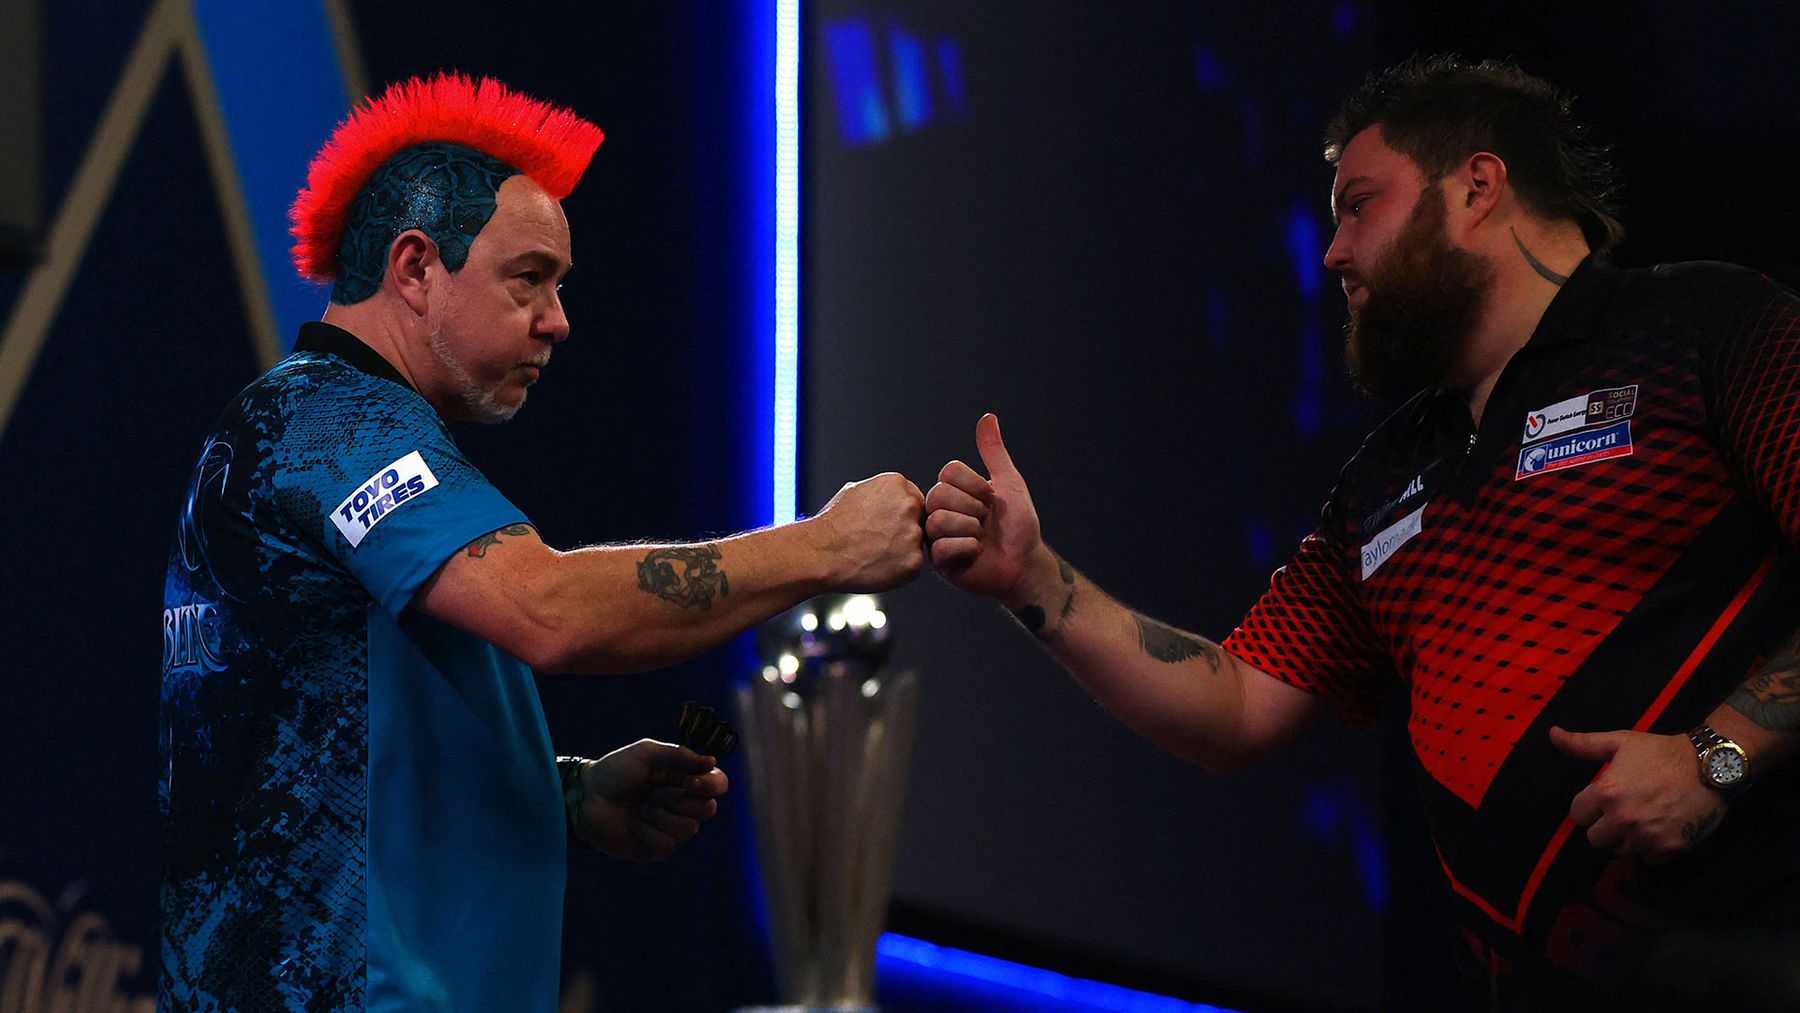 PDC World Darts Championship 2022 Draw, schedule, betting odds, results and live Sky Sports TV coverage